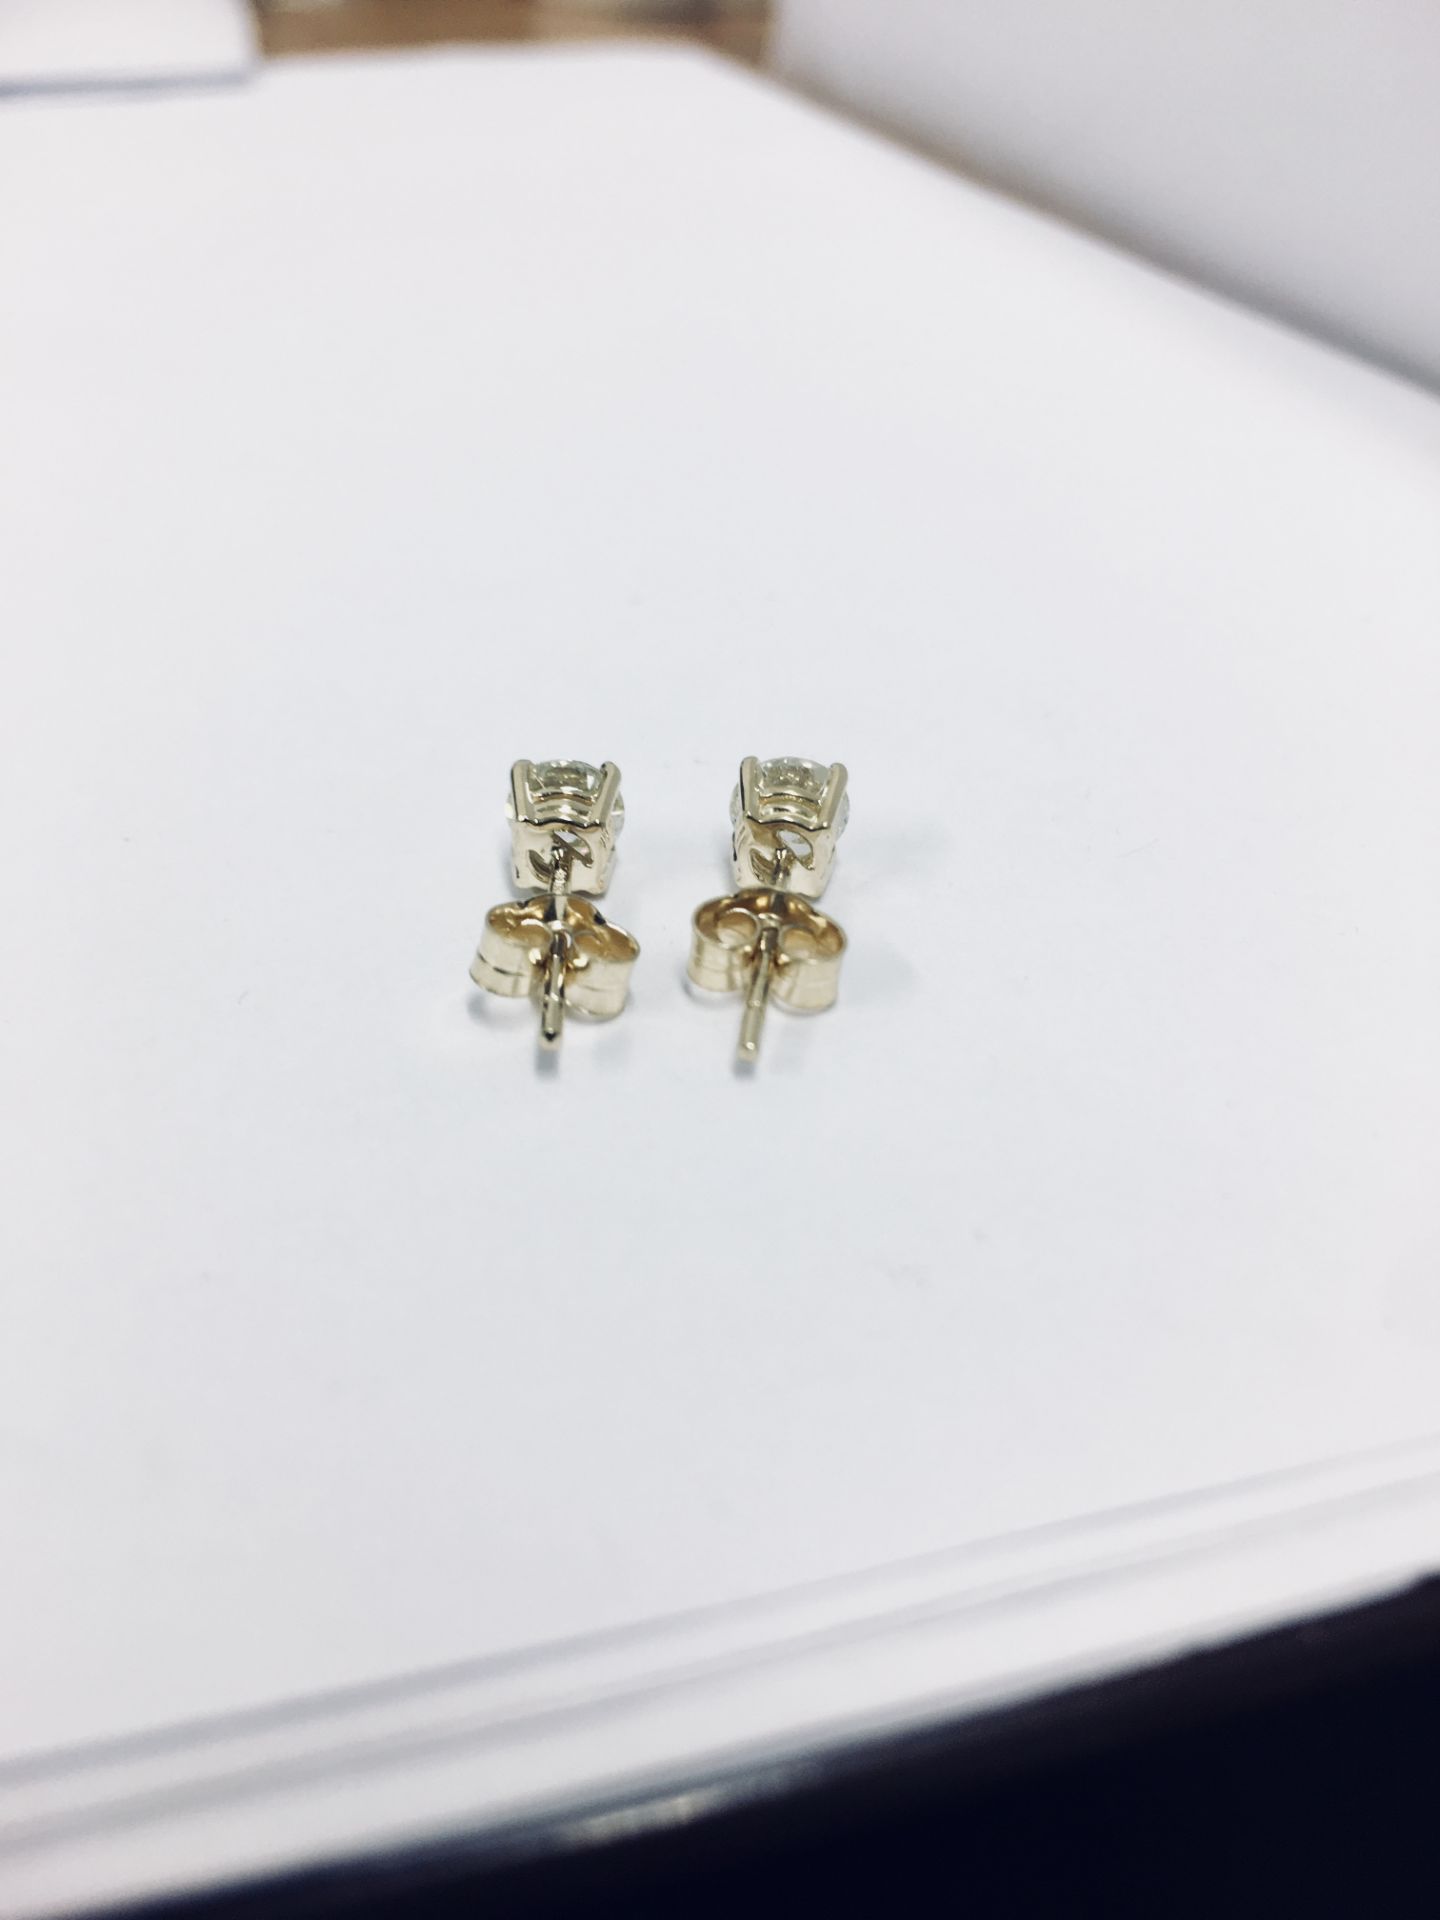 1.00ct diamond solitaire earrings set in 18ct yellow gold. 2 x brilliant cut diamonds, 0.50ct ( - Image 3 of 4